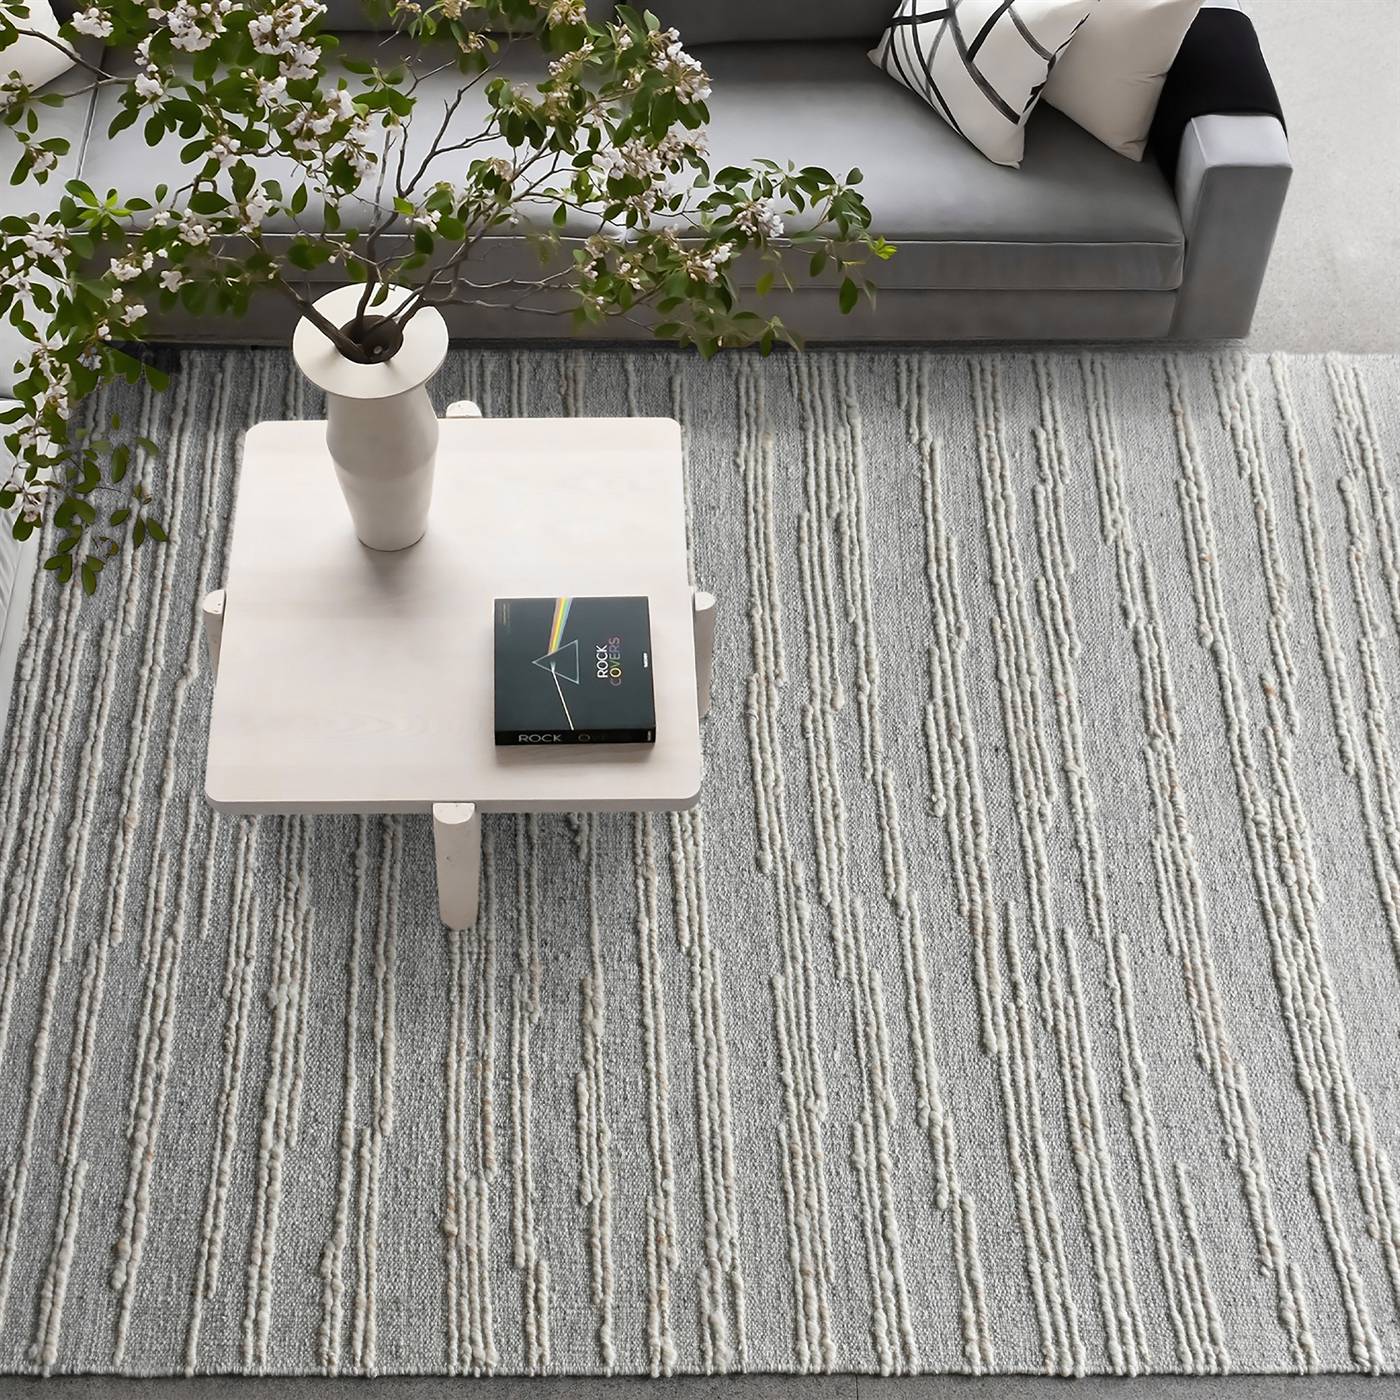 Area Rug, Bedroom Rug, Living Room Rug, Living Area Rug, Indian Rug, Office Carpet, Office Rug, Shop Rug Online, Grey, Natural White , Wool, Hand Knotted , Handknotted, Flat Weave, Intricate 